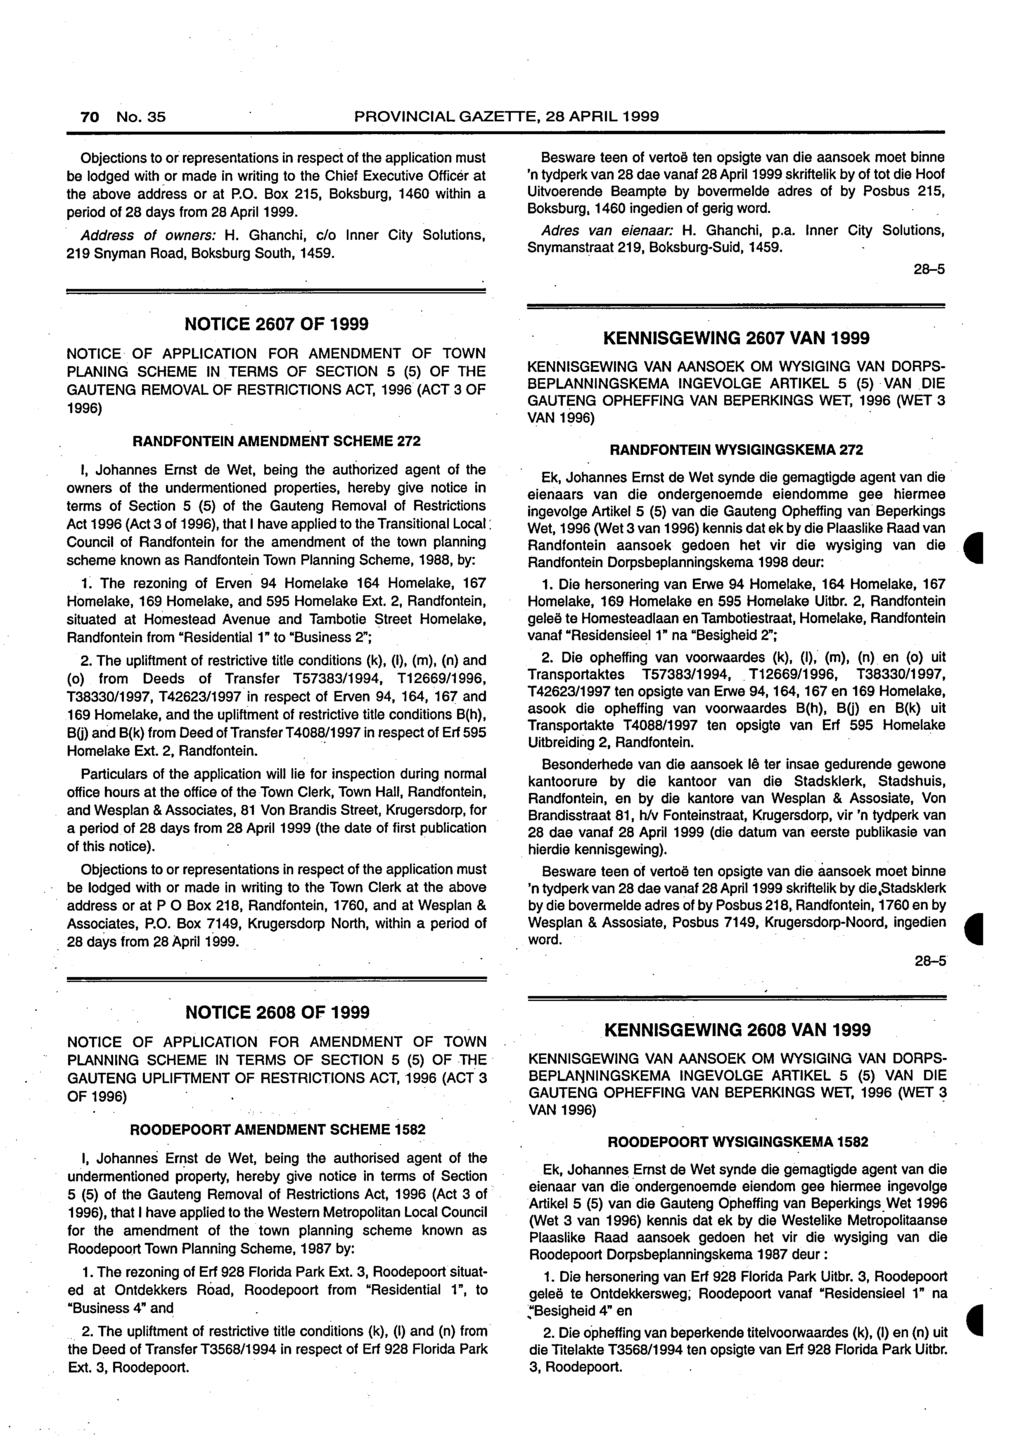 70 No. 35 PROVINCIAL GAZETTE, 28 APRIL 1999 be lodged with or made in writing to the Chief Executive Officer at the above address or at P.O. Box 215, Boksburg, 1460 within a period of 28 days from 28 April 1999.